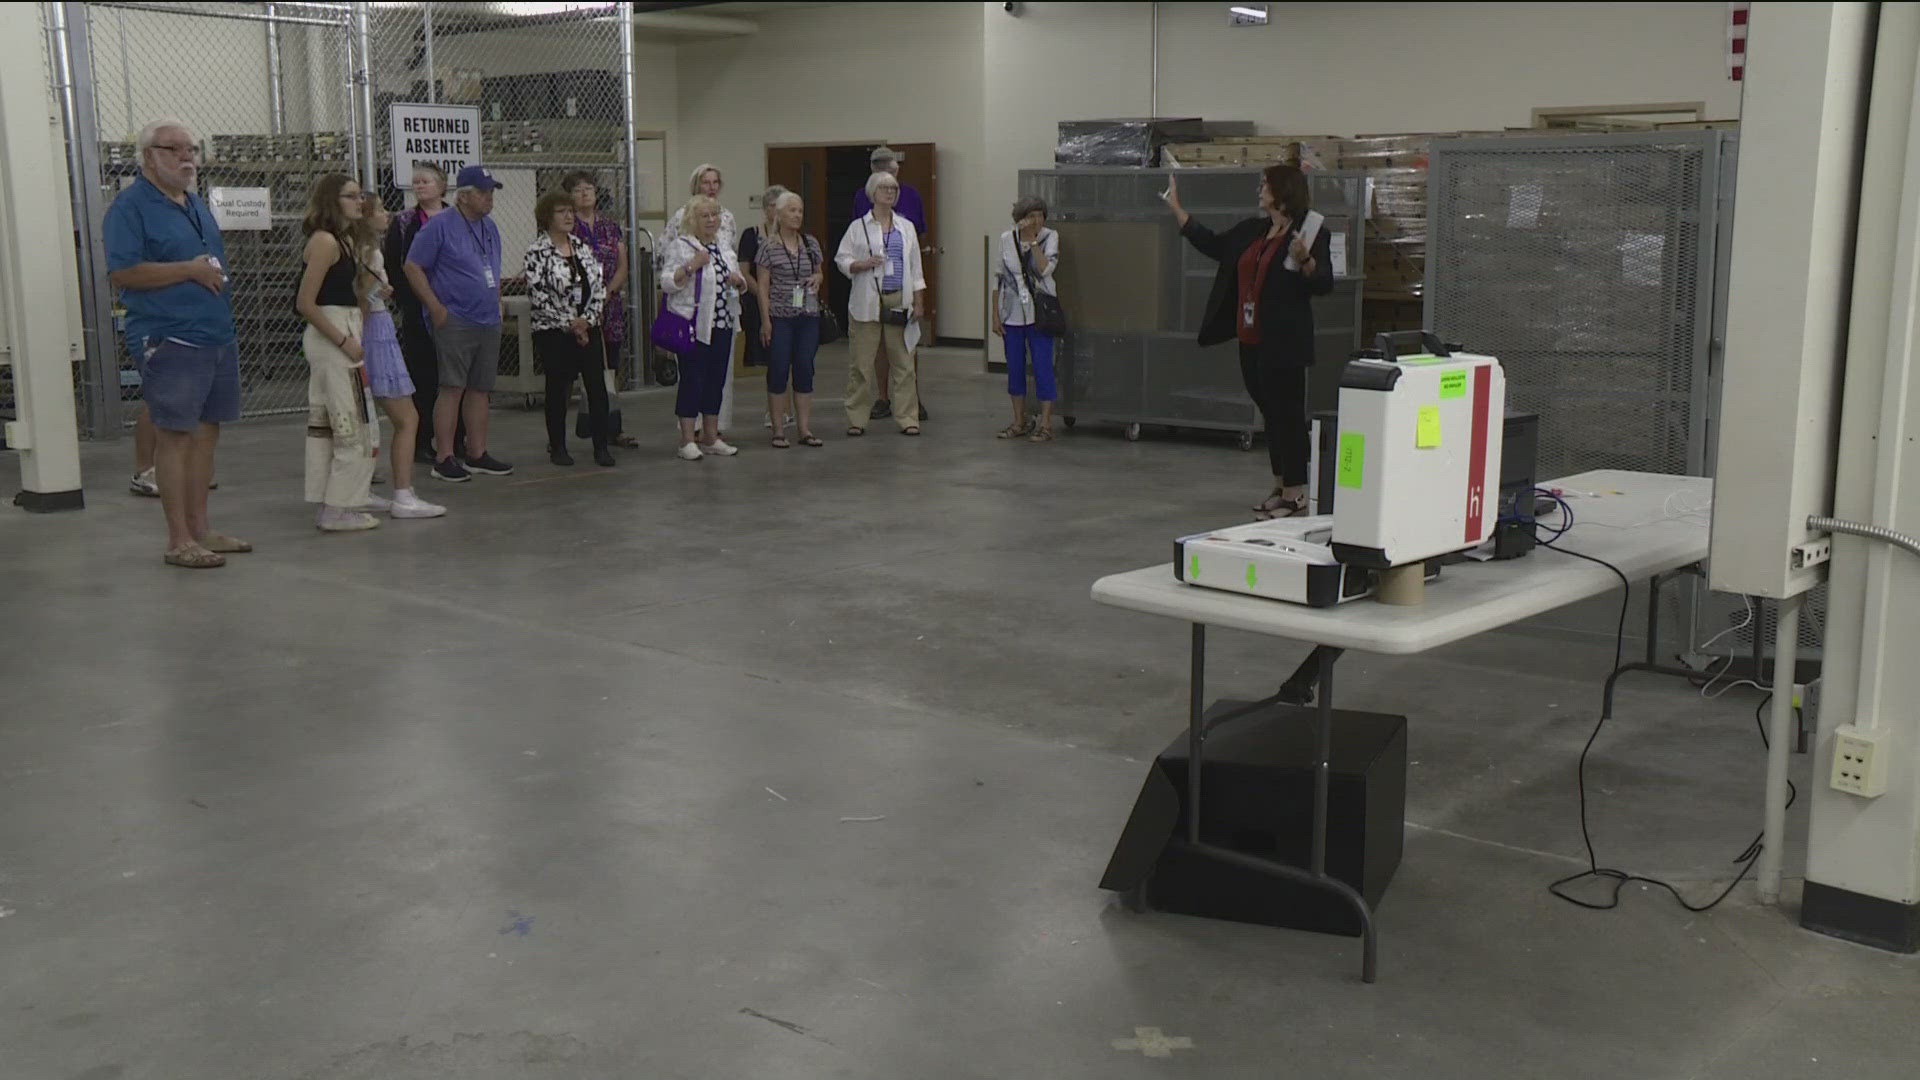 In an effort to have more people volunteer at the polls, Ada County officials hosted an open house showing what it means to help during the elections.